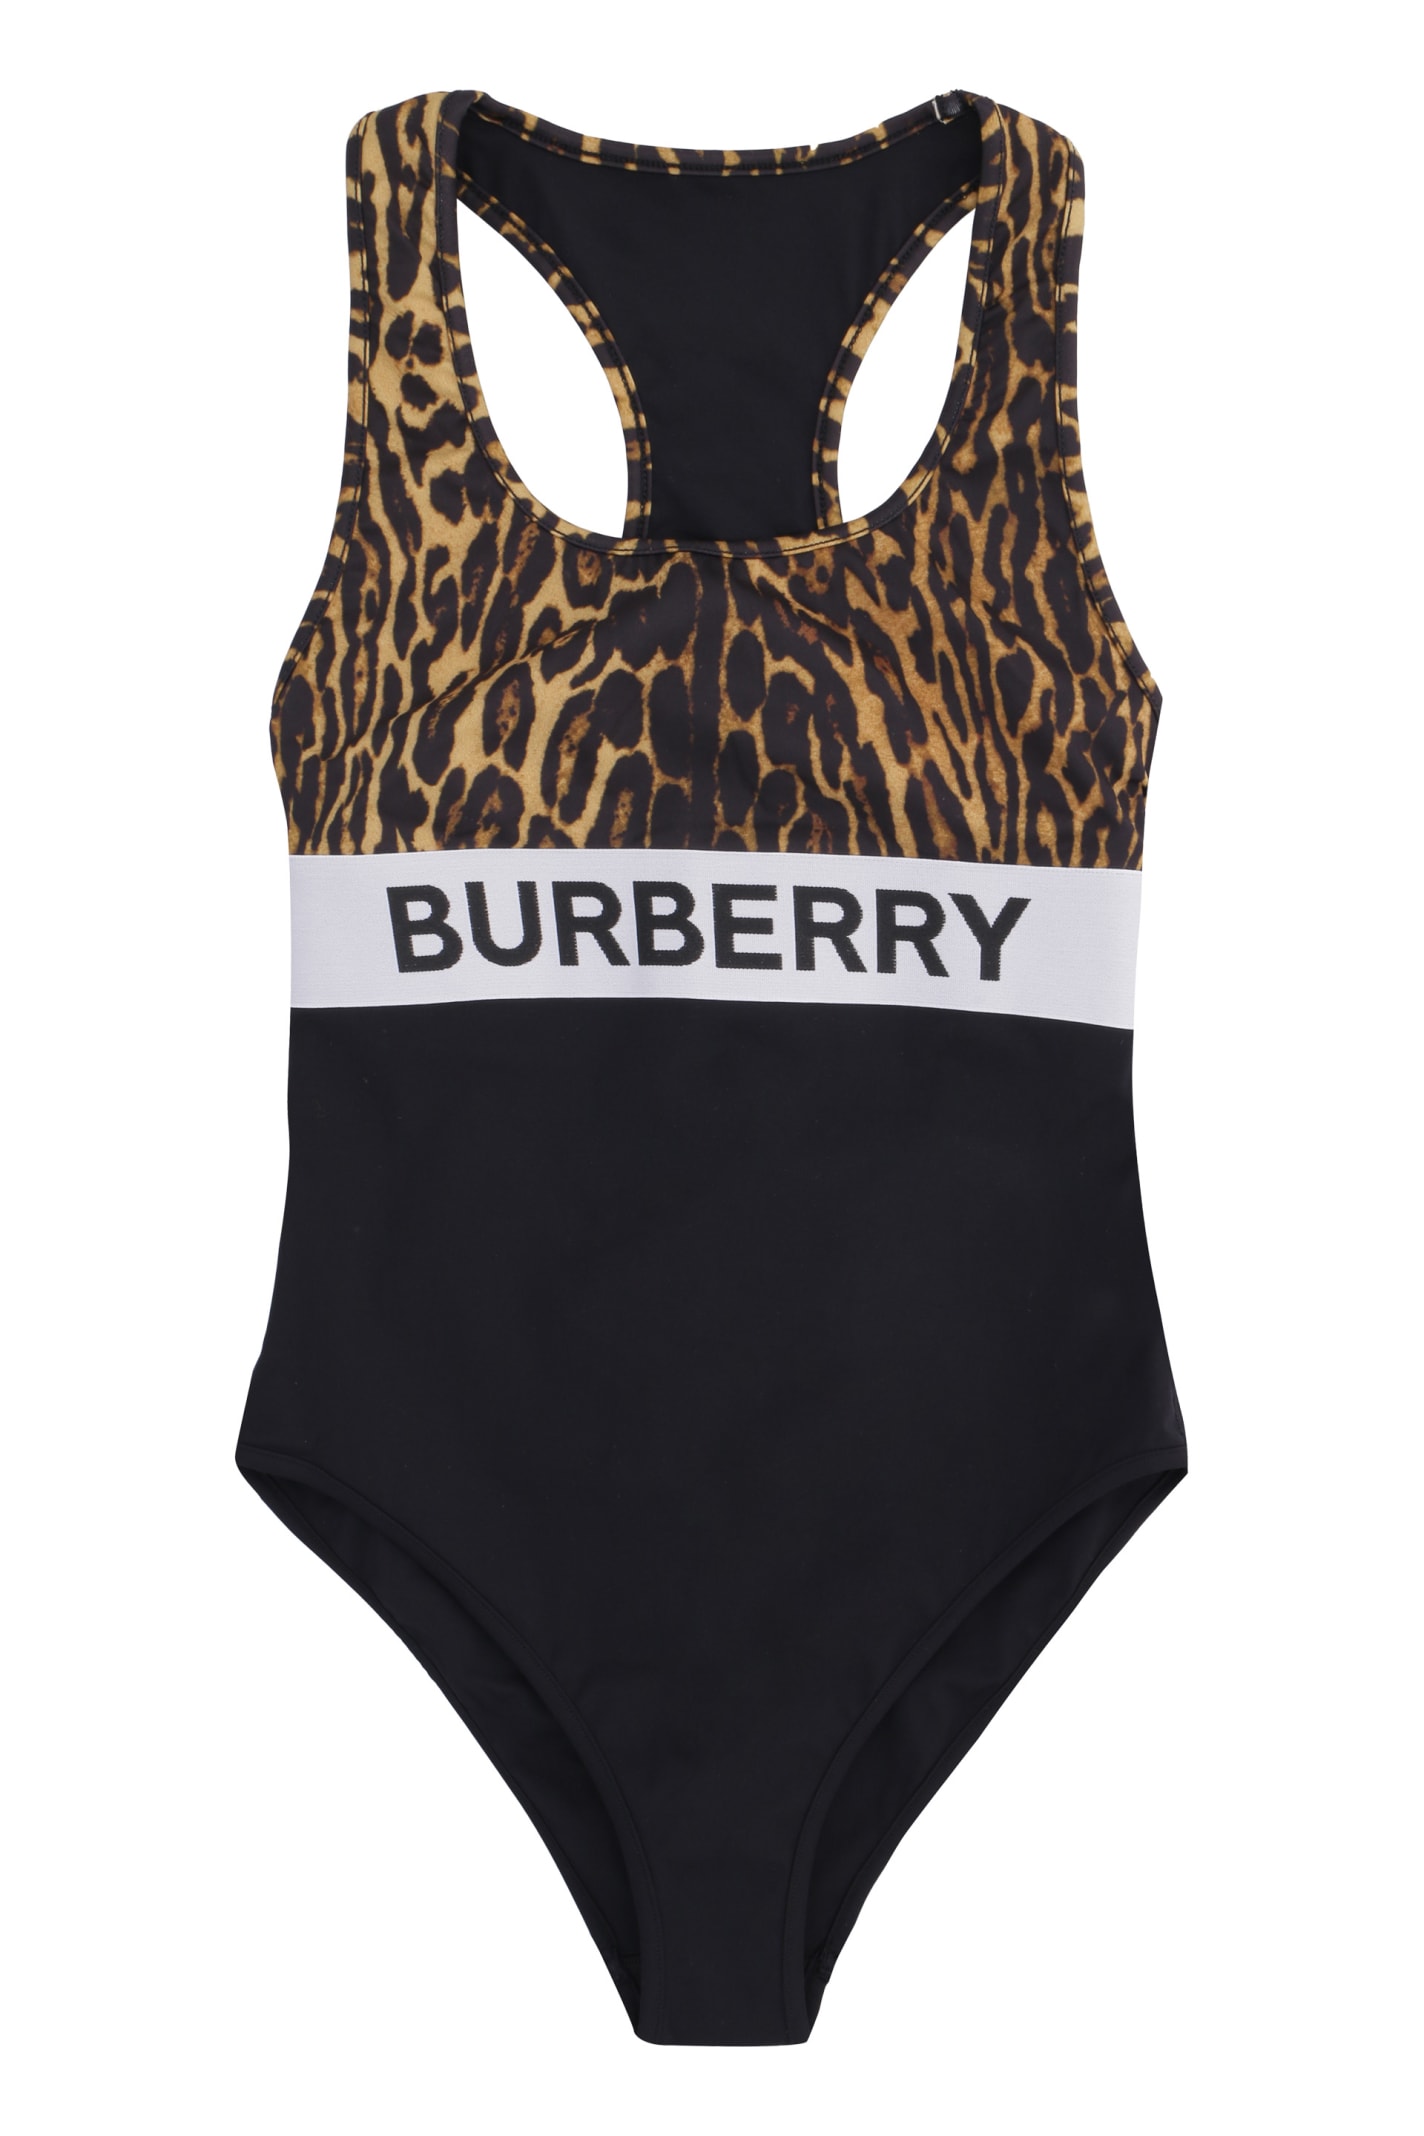 BURBERRY ONE-PIECE SWIMSUIT WITH LOGO,11311678